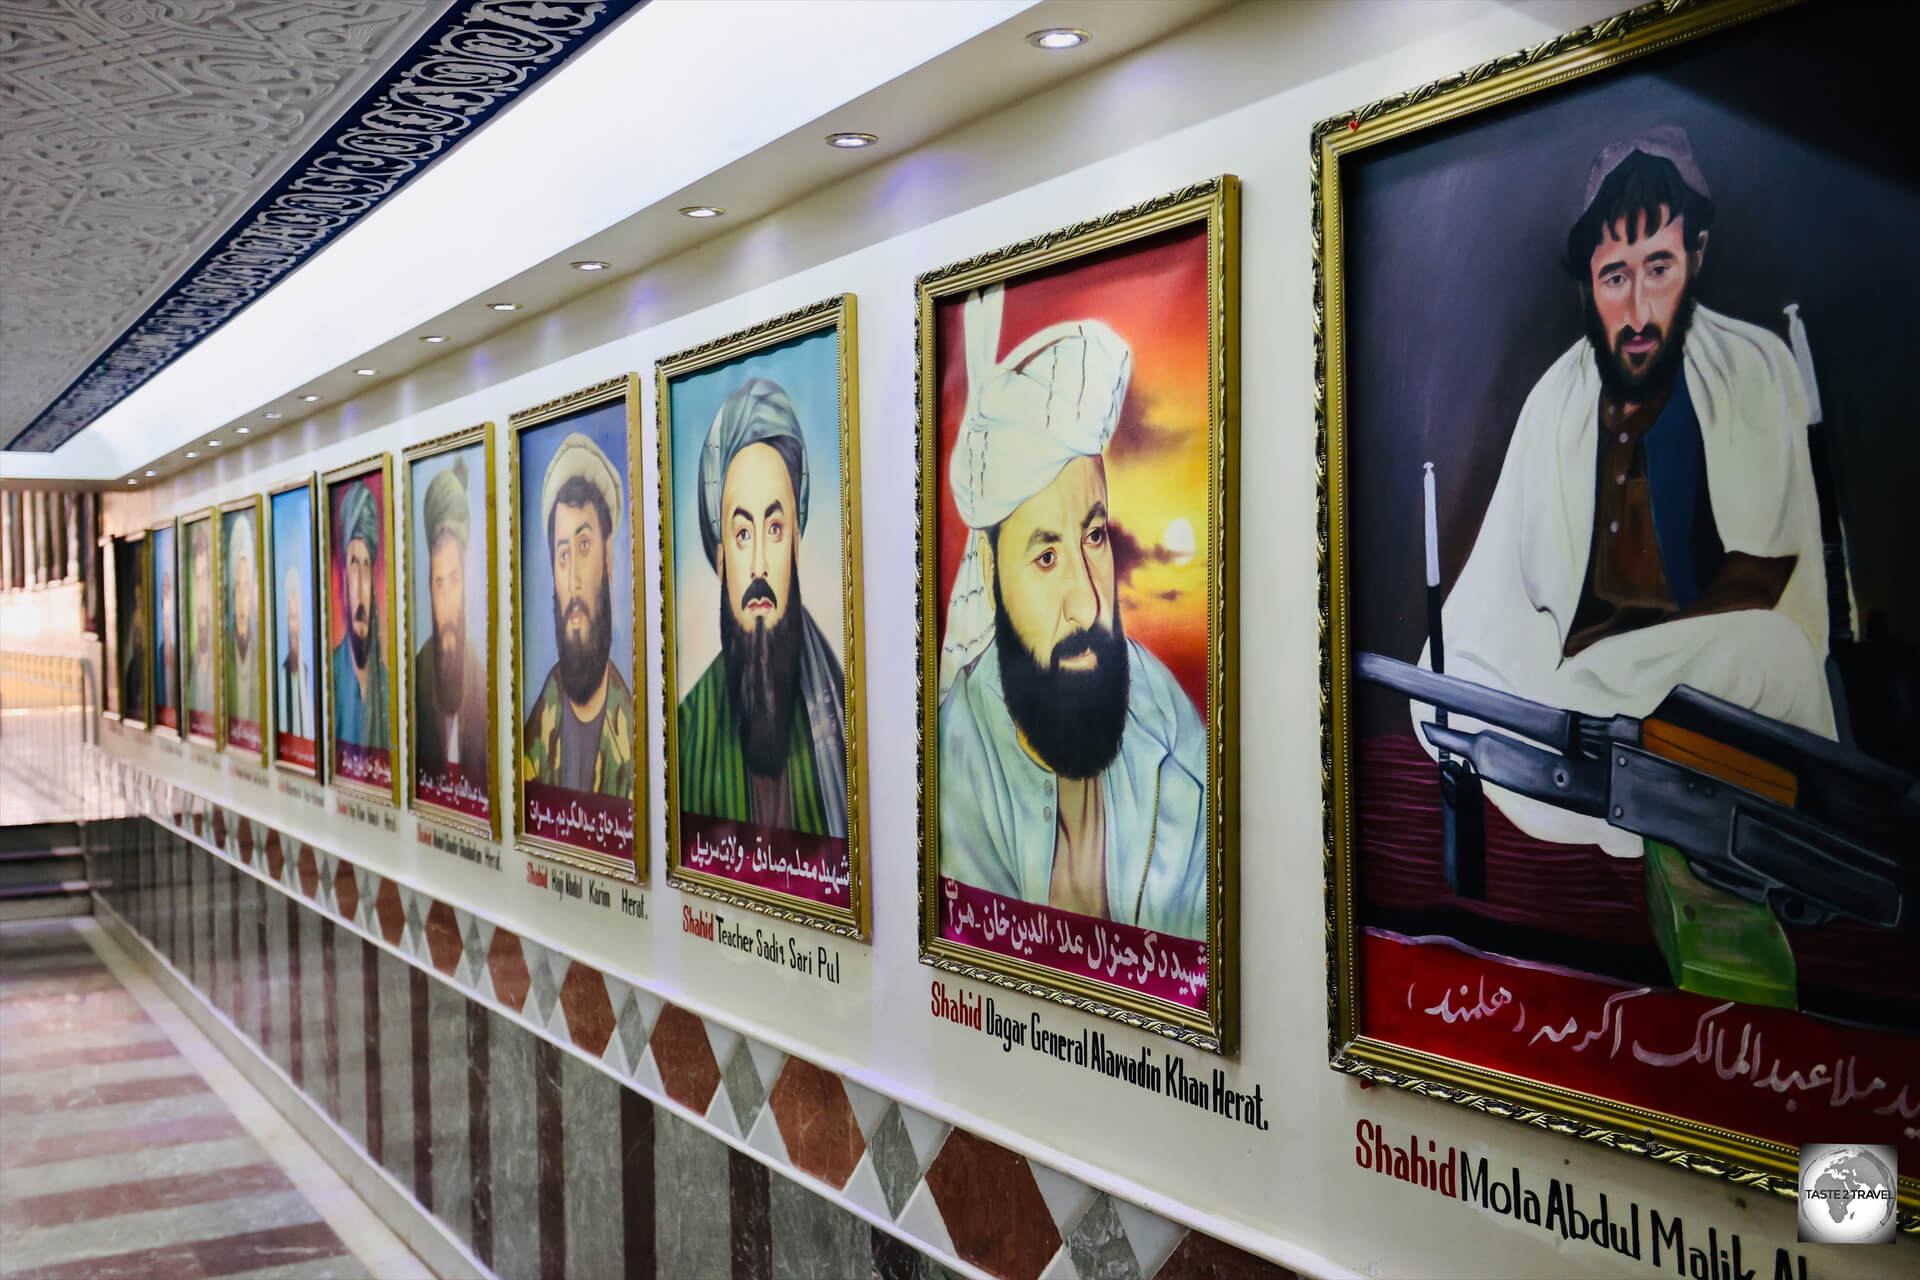 The 'Portrait Hall of Fame' displays portraits of over 60 Afghan commanders who fought the Soviets.